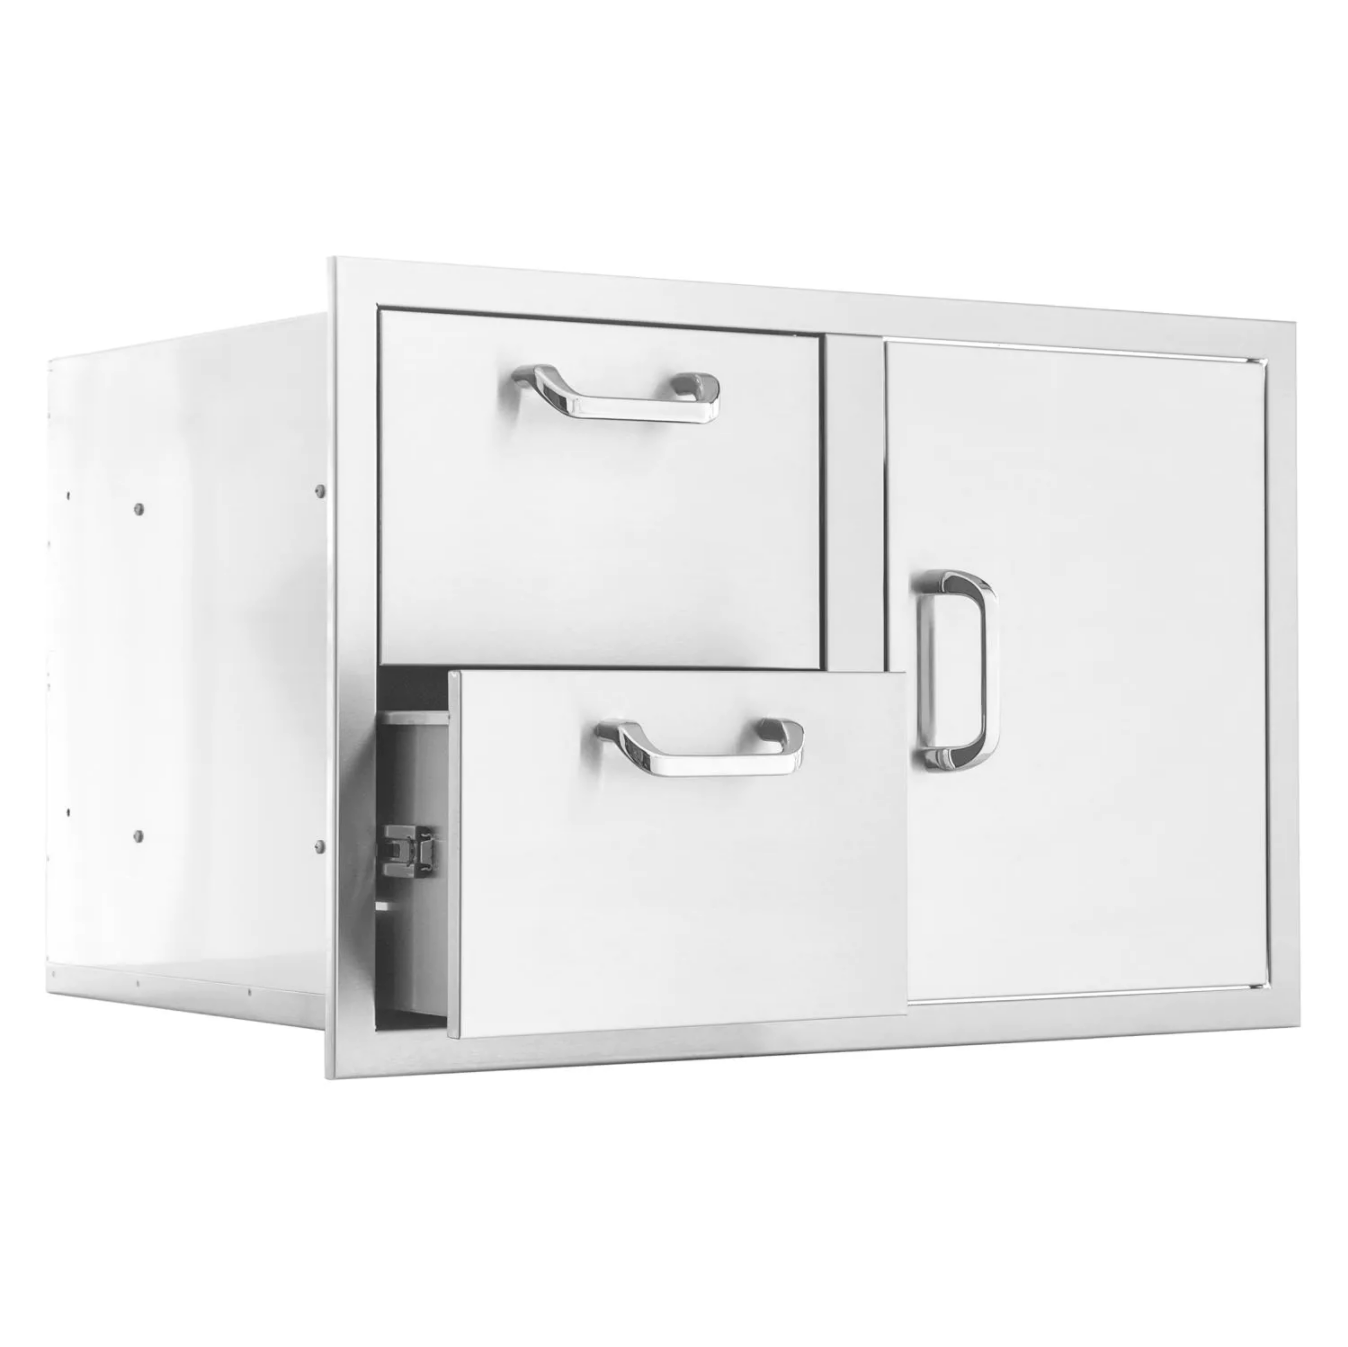 PCM 260 Series 32" Stainless Steel Reversible Access Door & Double Drawer Combo